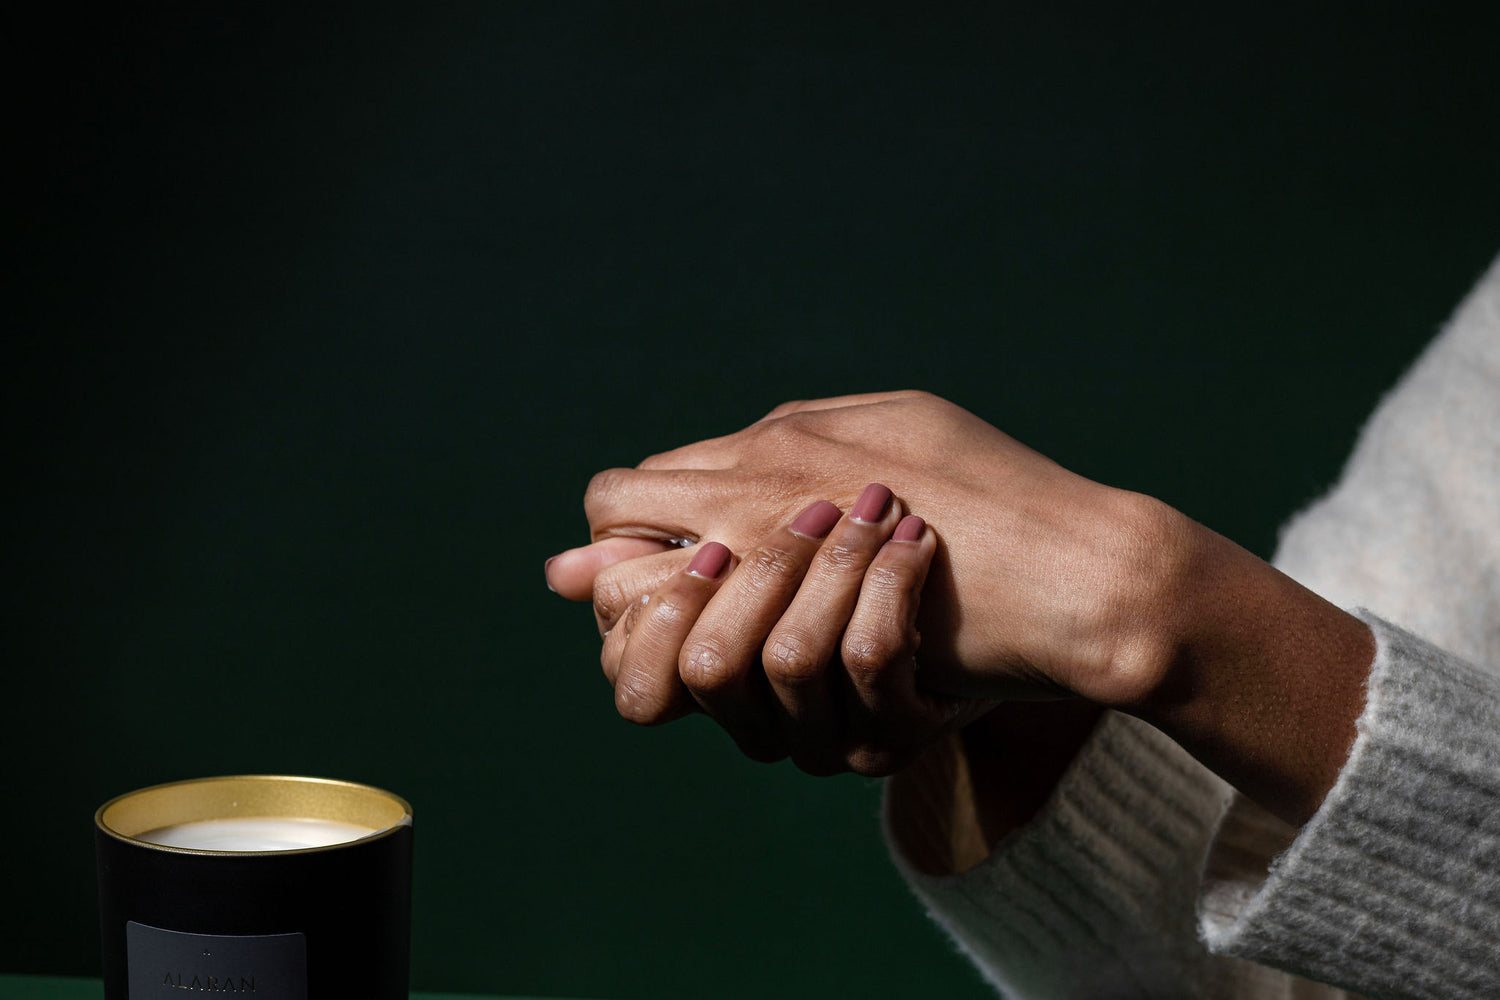 Hands being rubbed together next to candle on a dark green background